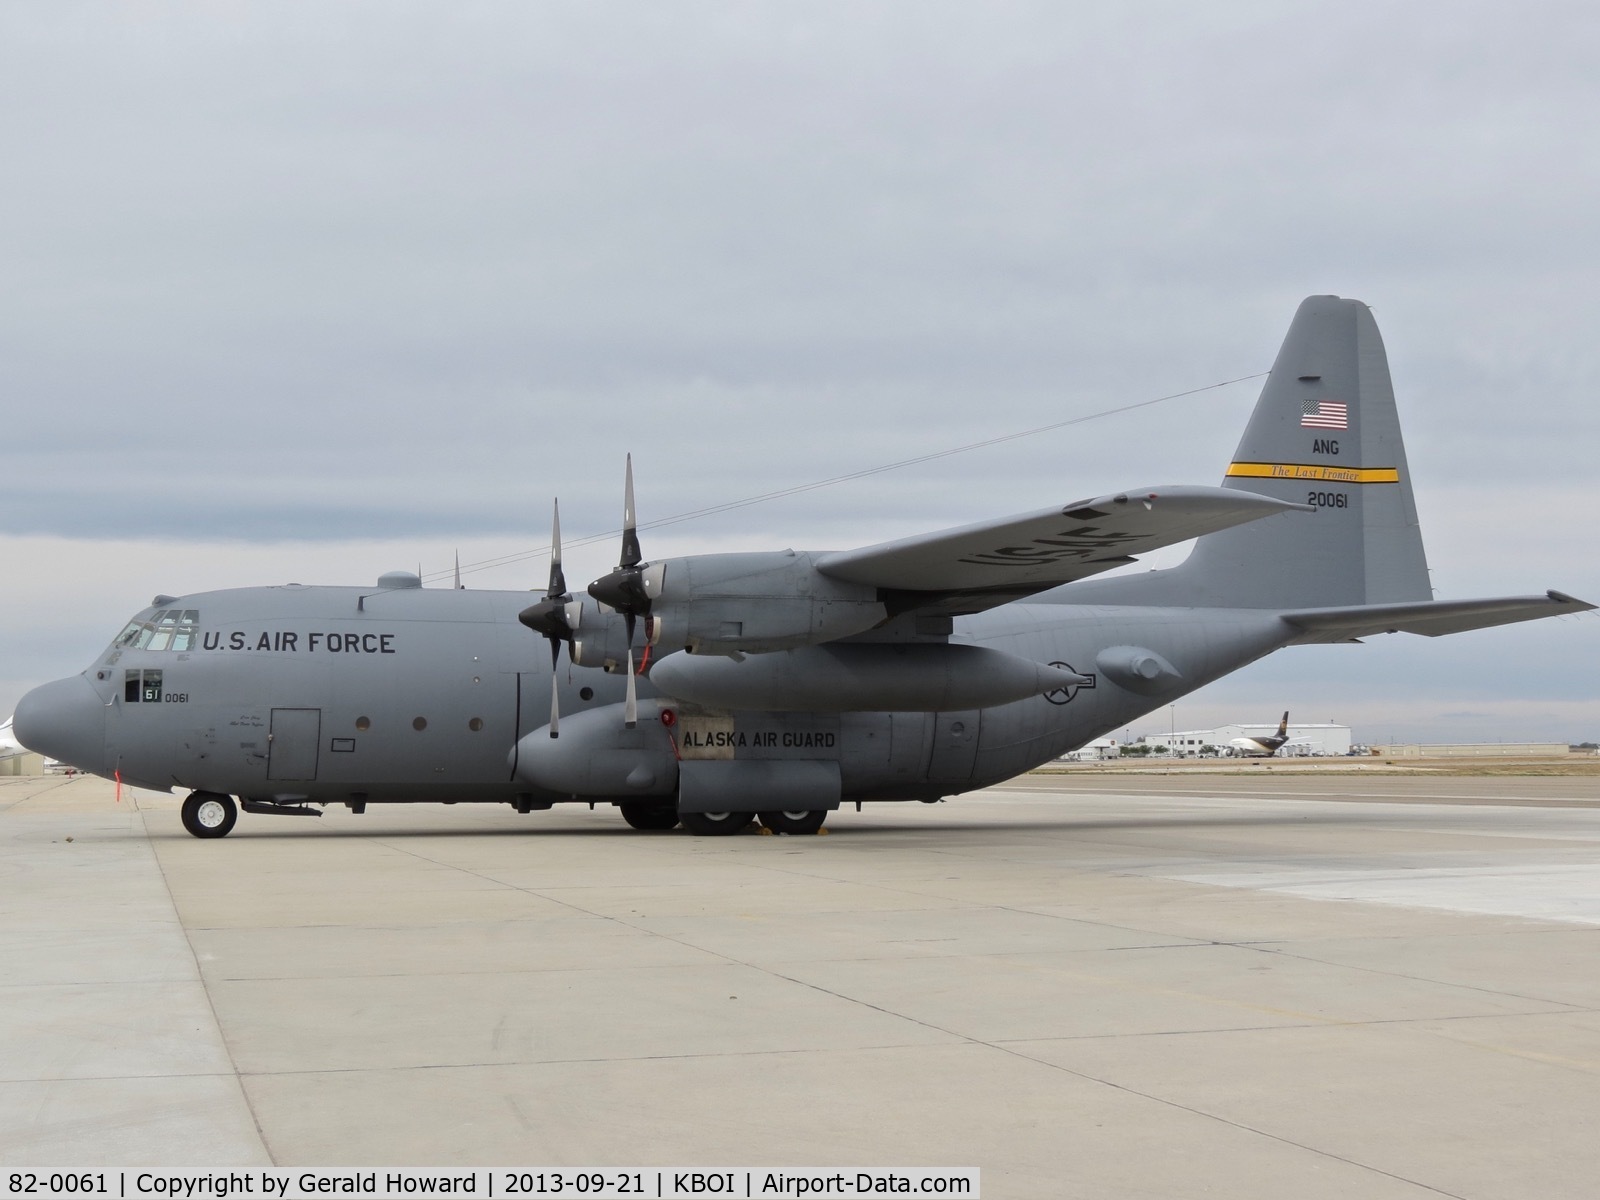 82-0061, 1982 Lockheed C-130H Hercules C/N 382-4982, 144th Airlift Sq., Alaska ANG. Deactivated in march 2017.